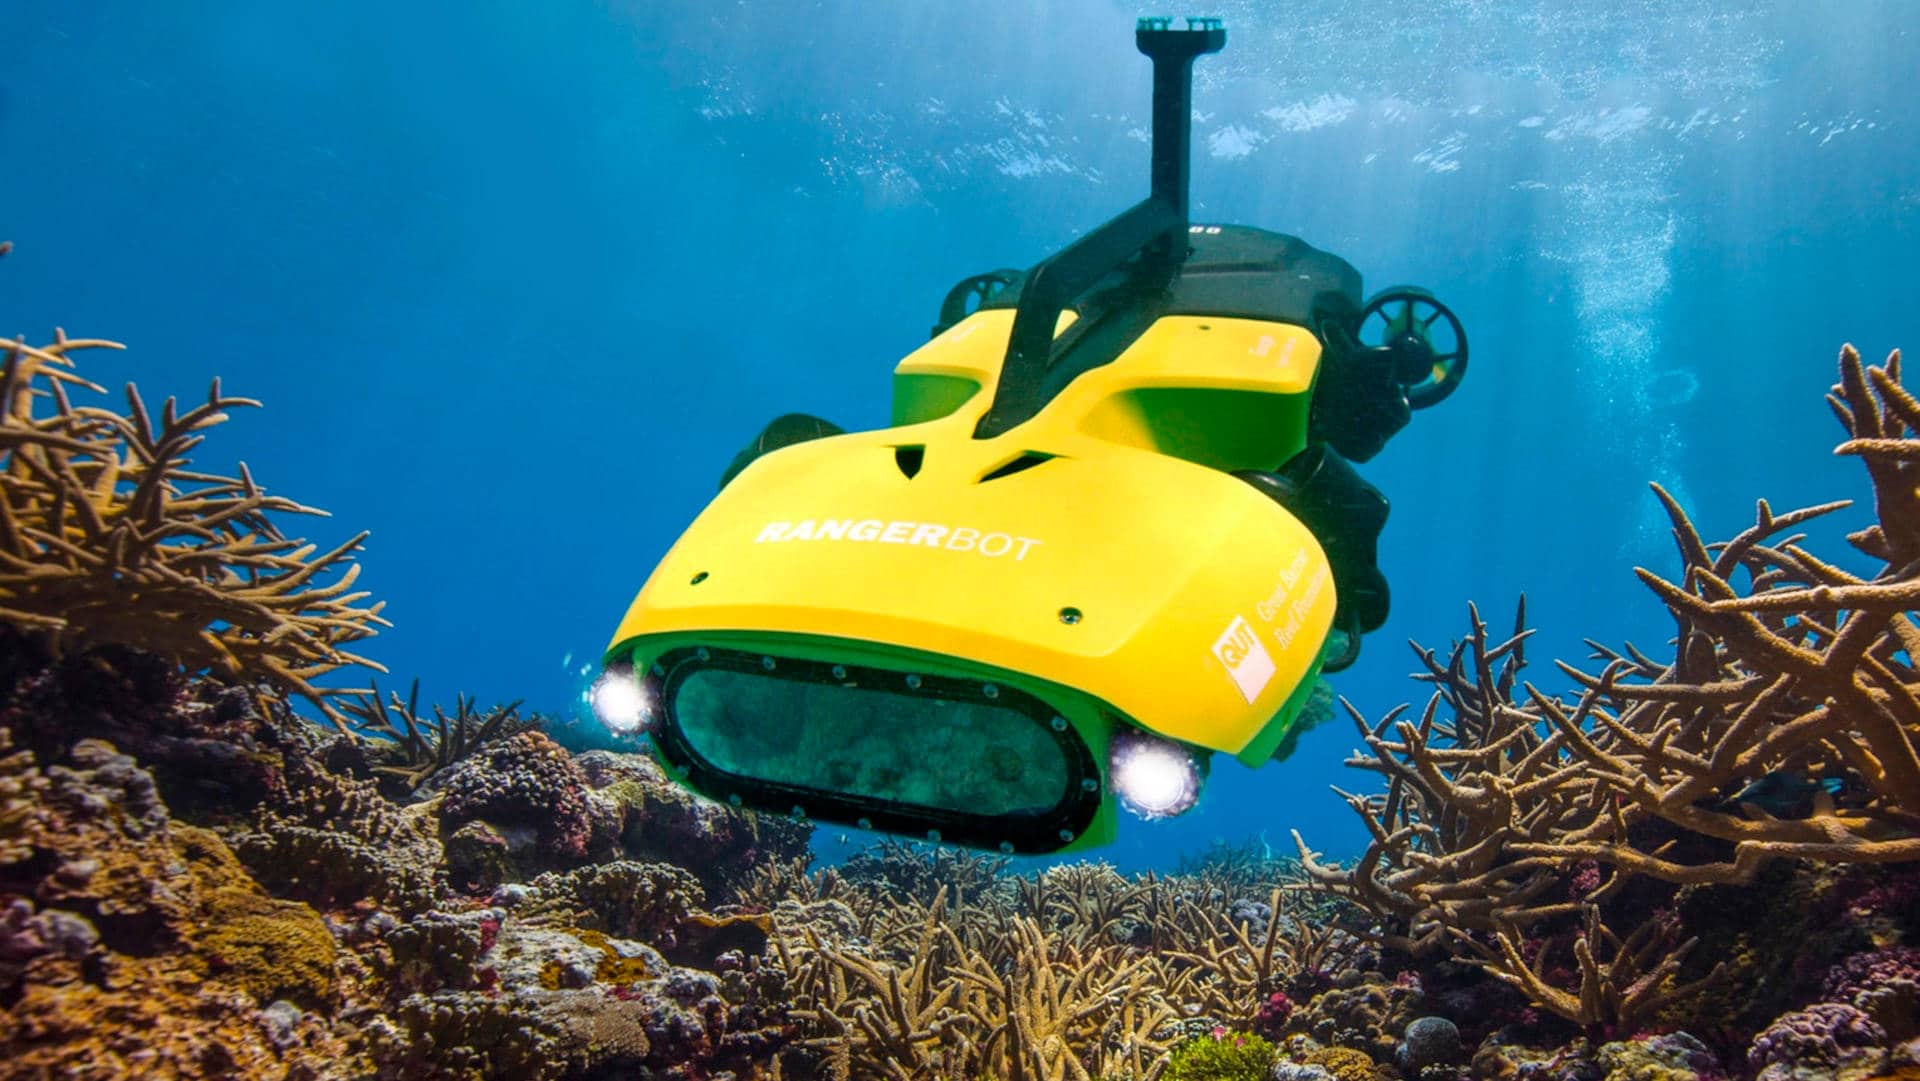 RangerBot, an autonomous underwater robot developed by the Great Barrier Reef Foundation and the Queensland University of Technology, protects the reef from harmful crown-of-thorns starfish.